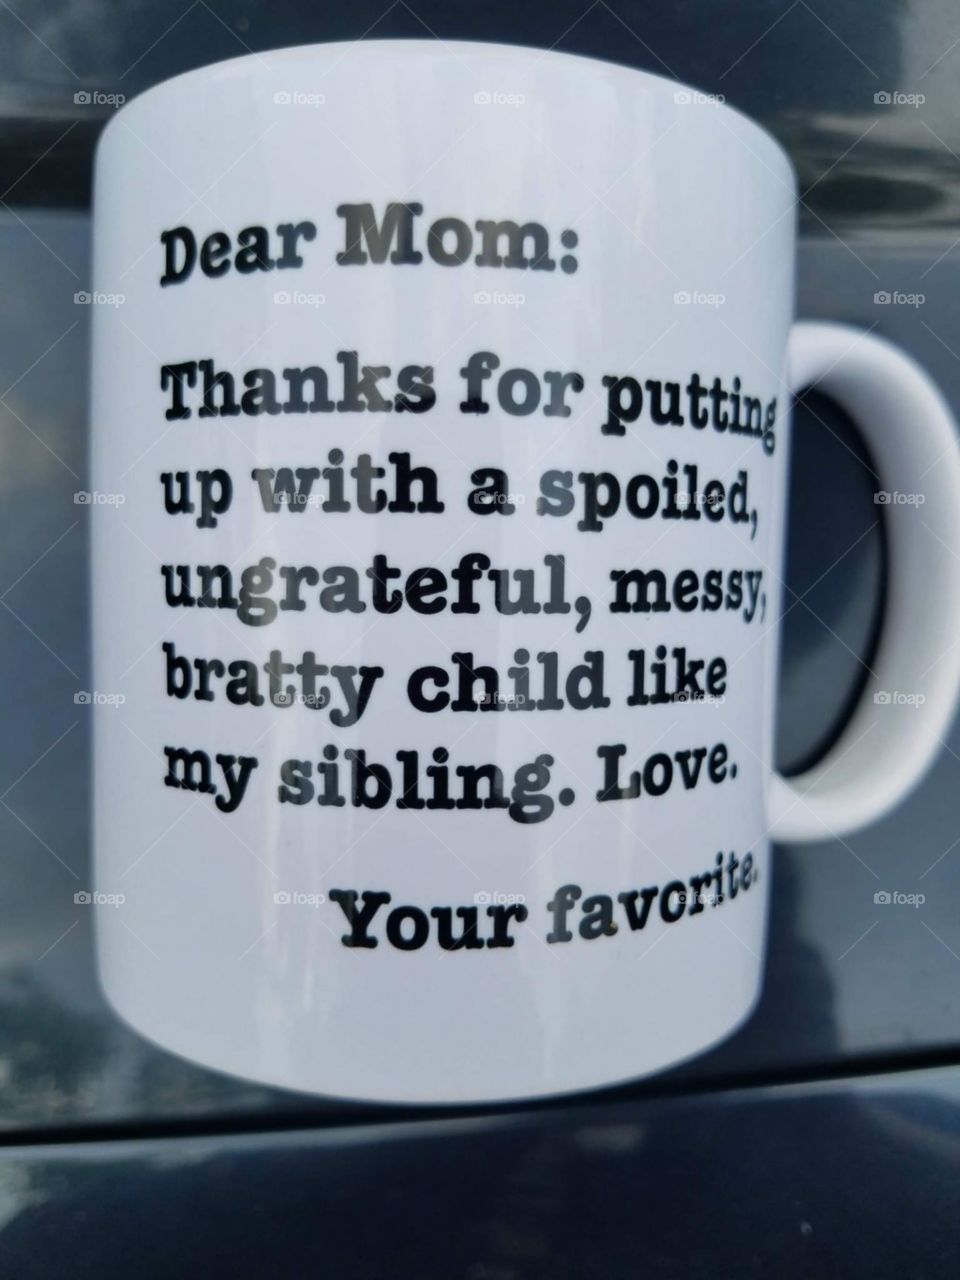 Mother's Day gift